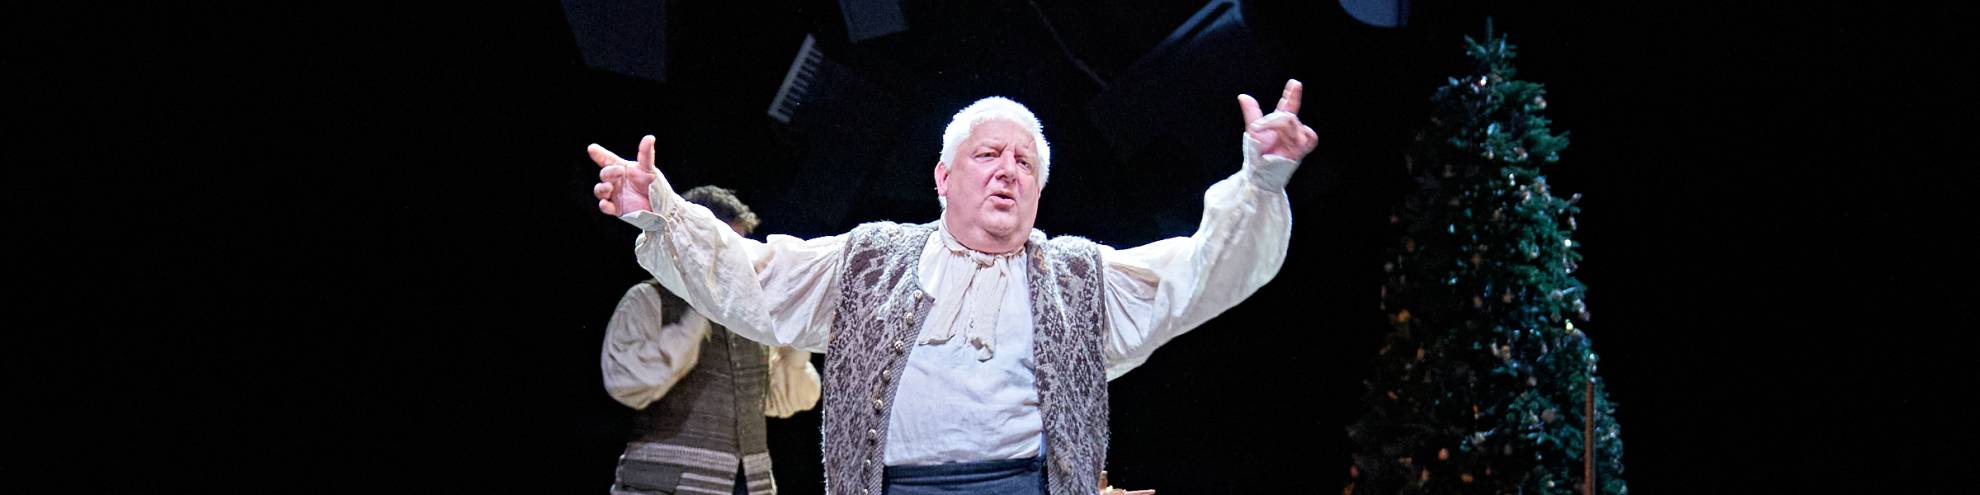 Simon Russell Beale, with short, grey hair and wearing 18th-century dress, dances in front of a wooden keyboard instrument. In the background, a Christmas tree.